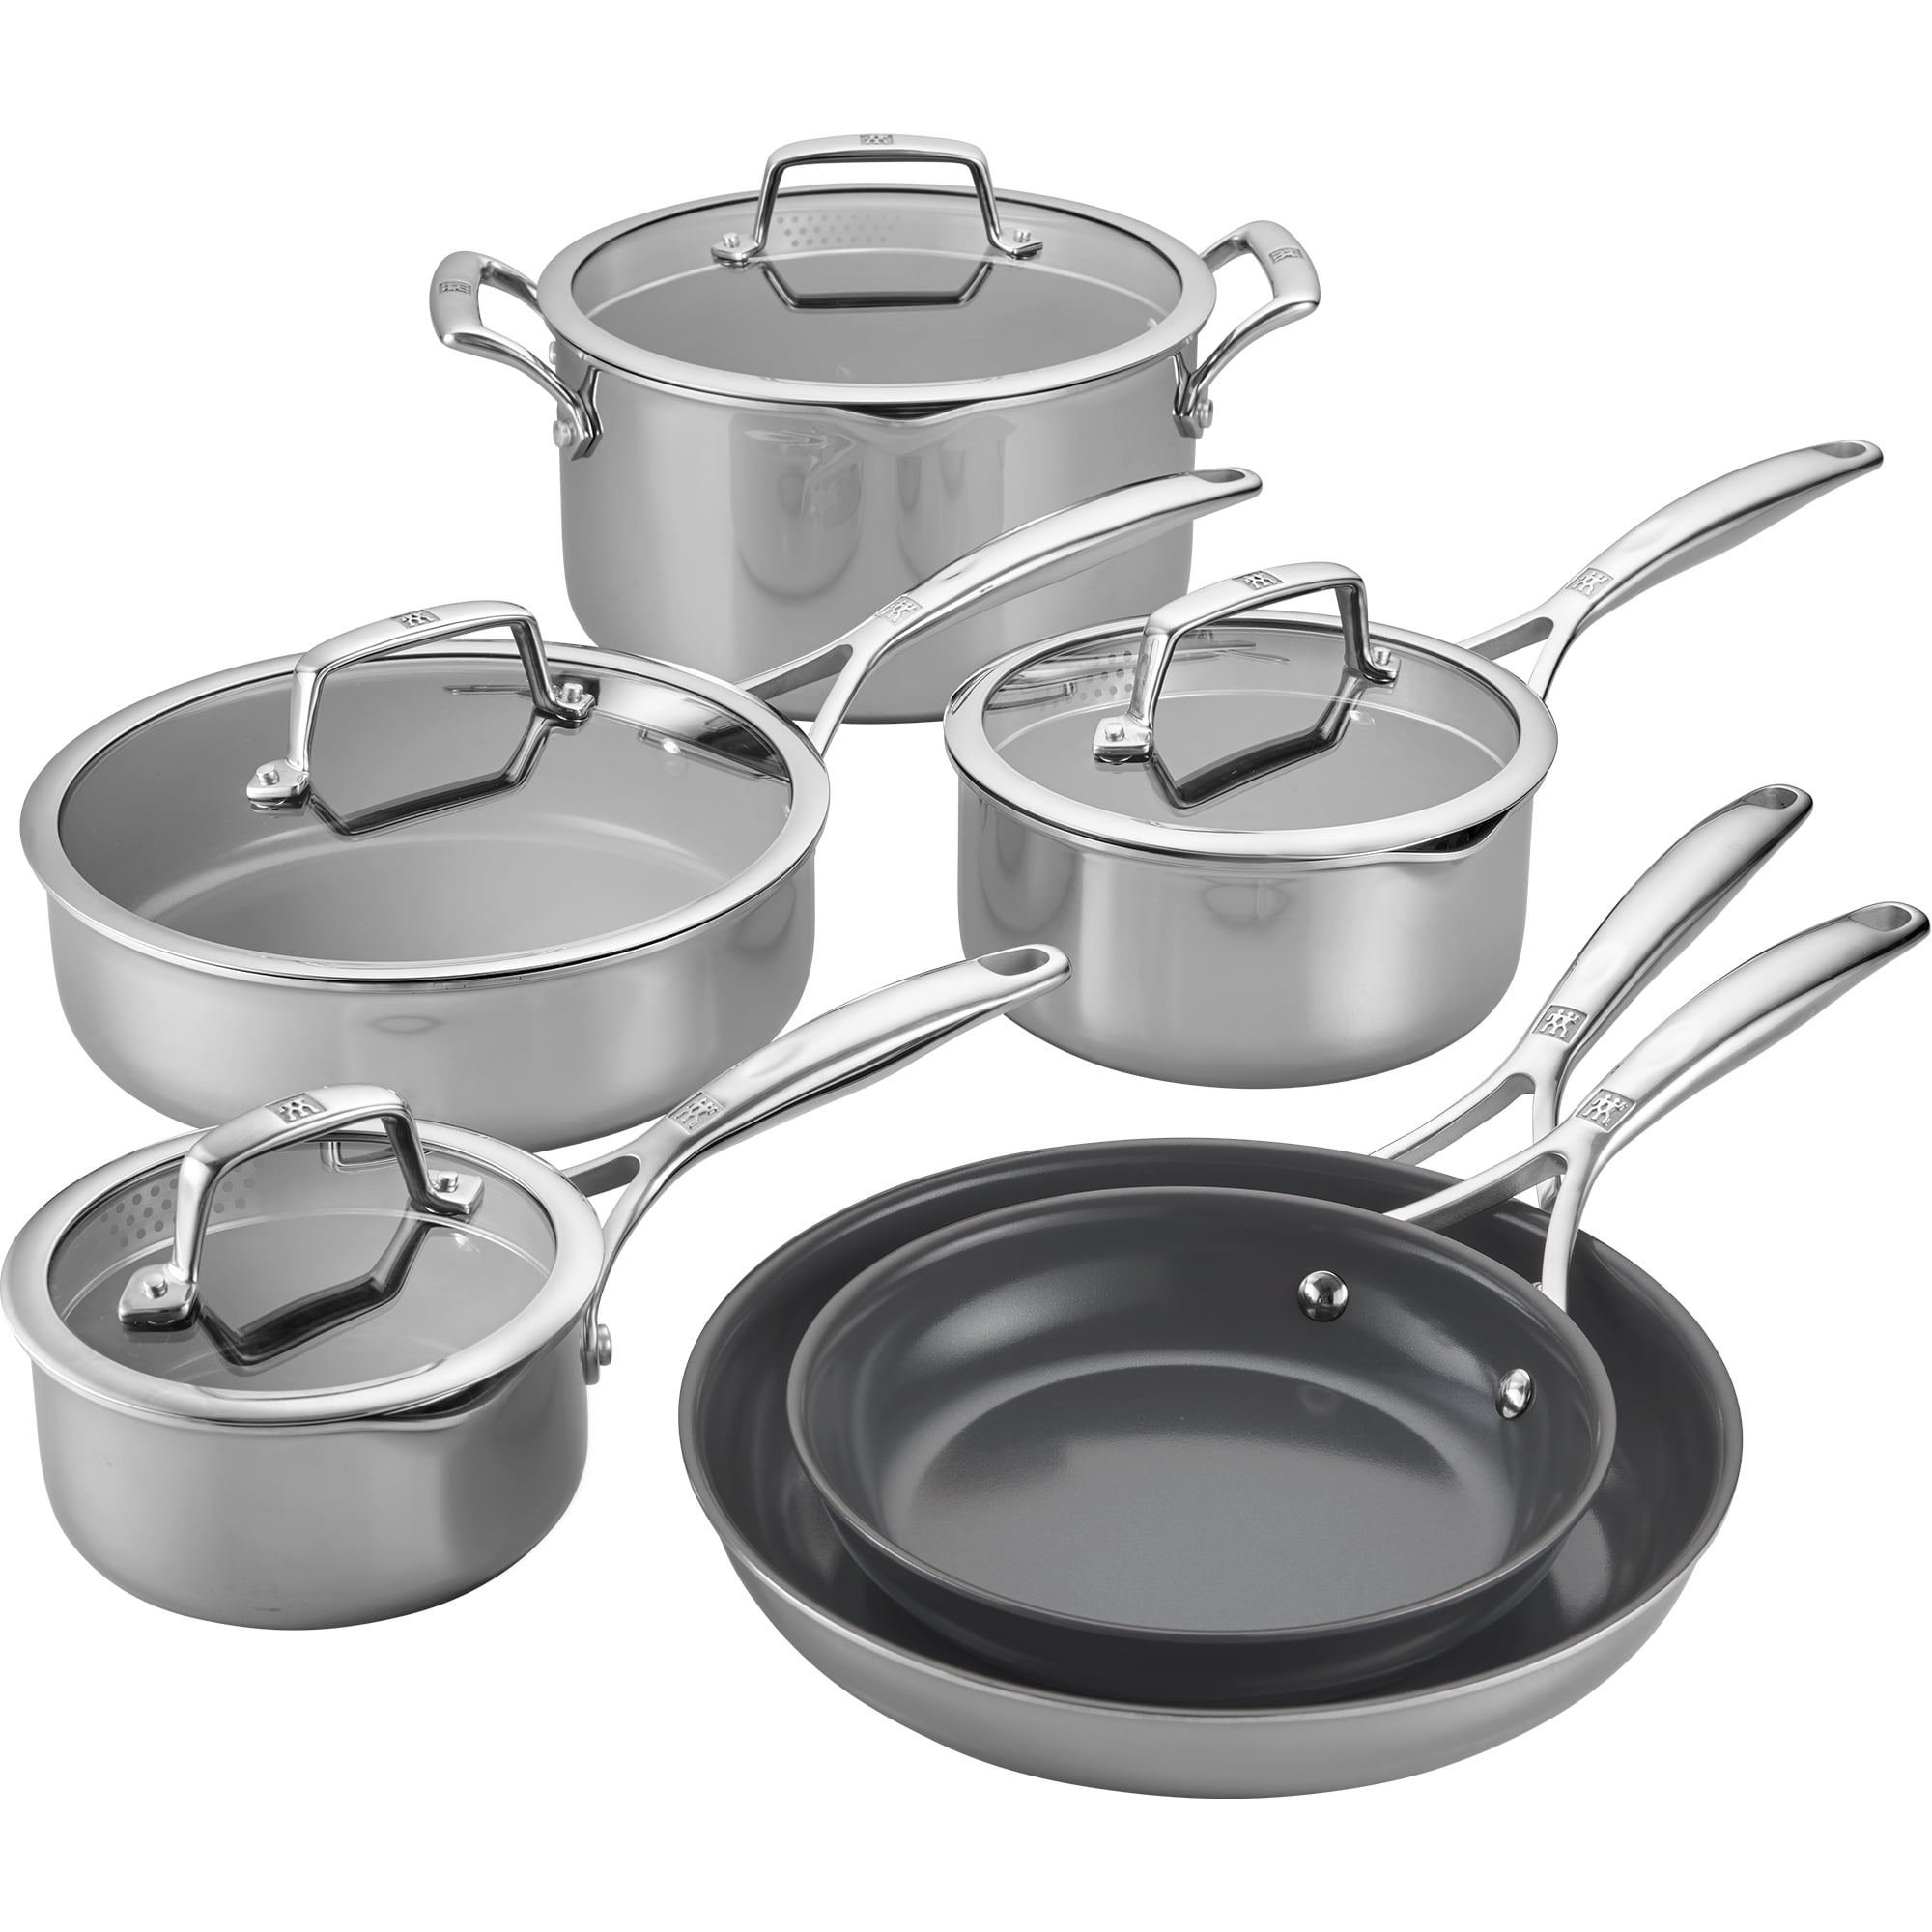 ZWILLING Energy Plus 10-pc Stainless Steel Ceramic Nonstick Cookware Set